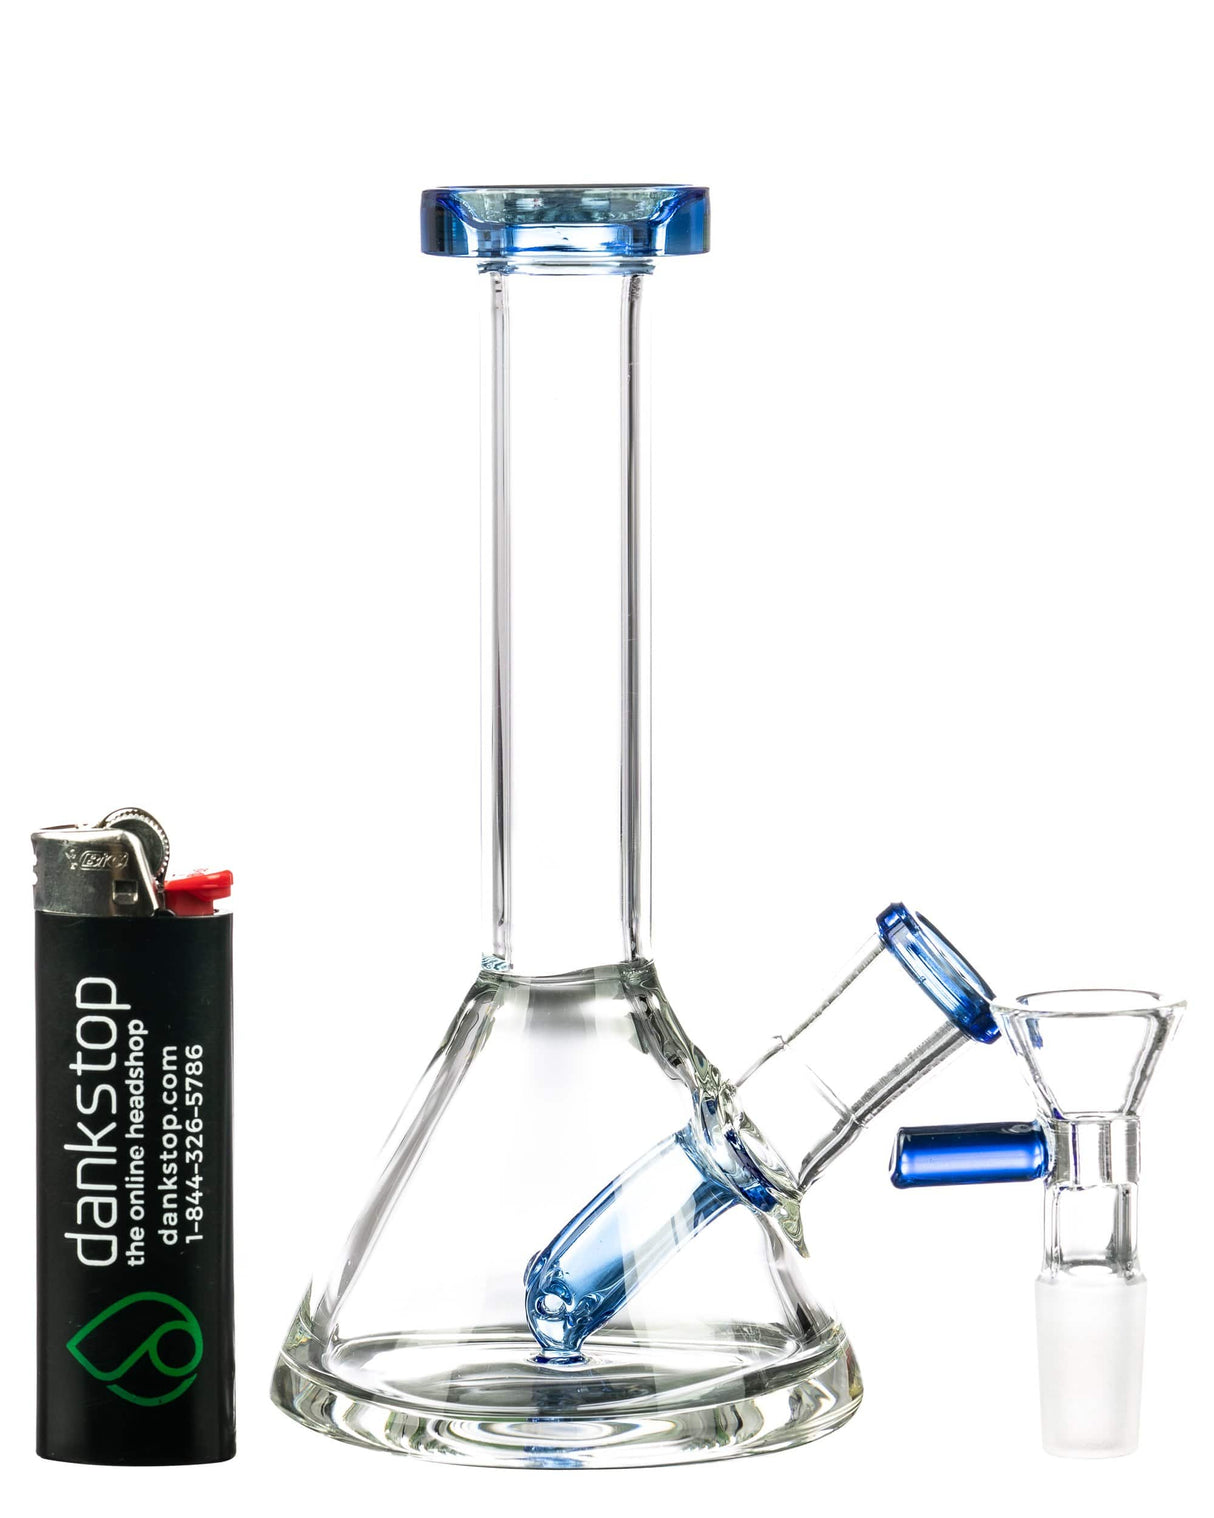 Valiant Distribution Fixed Downstem Mini Beaker Bong in blue, clear glass, side view with lighter for scale